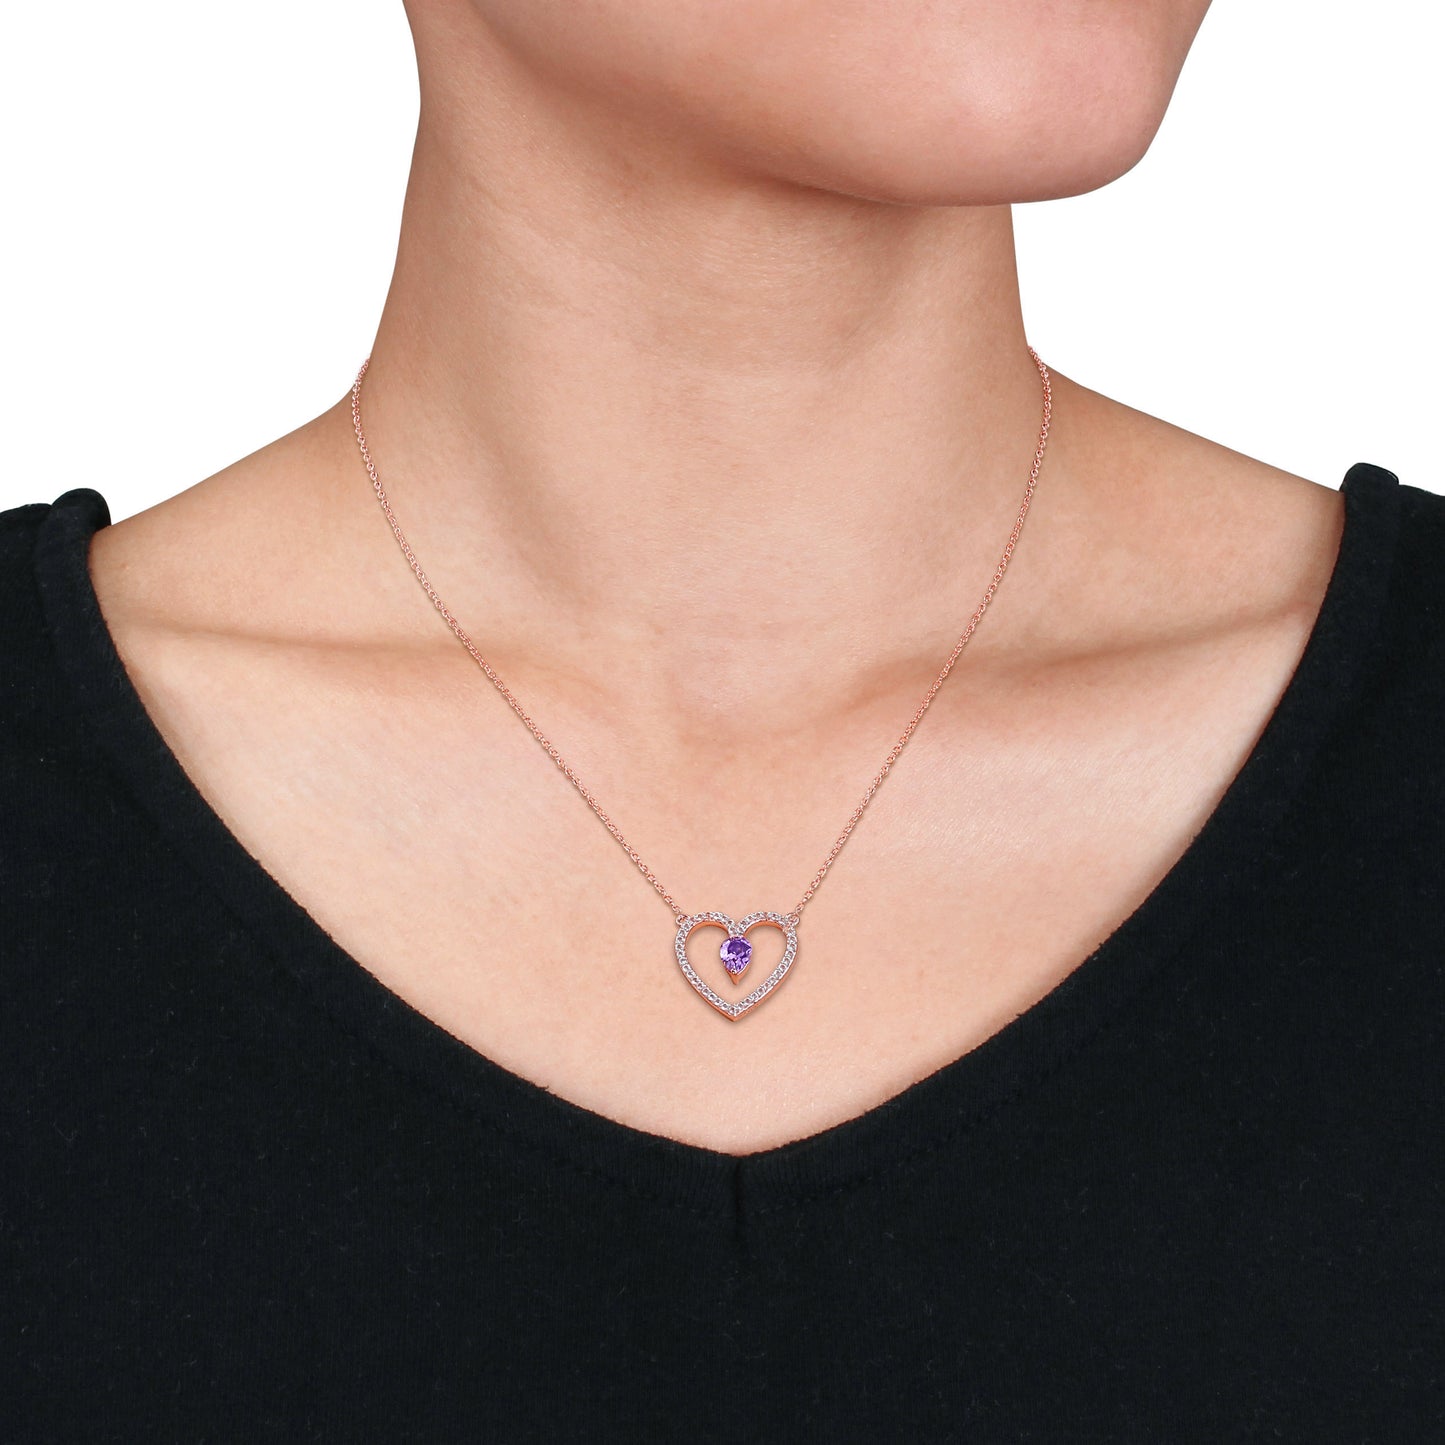 1 1/8ct Amethyst & White Topaz Heart Necklace in Rose Silver